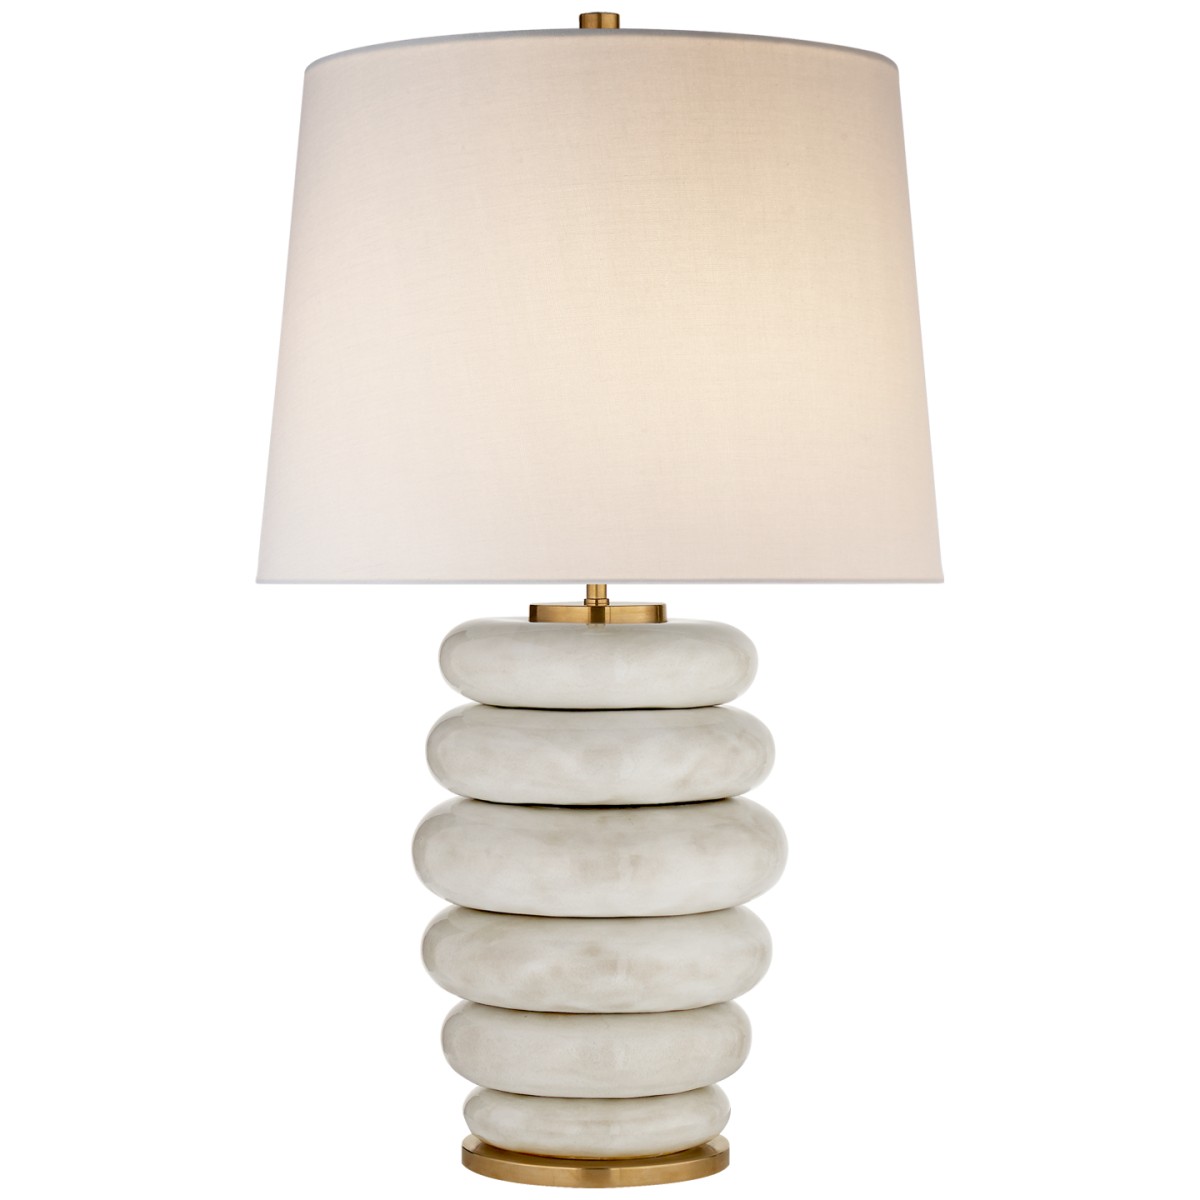 Phoebe Stacked Table Lamp with Linen Shade